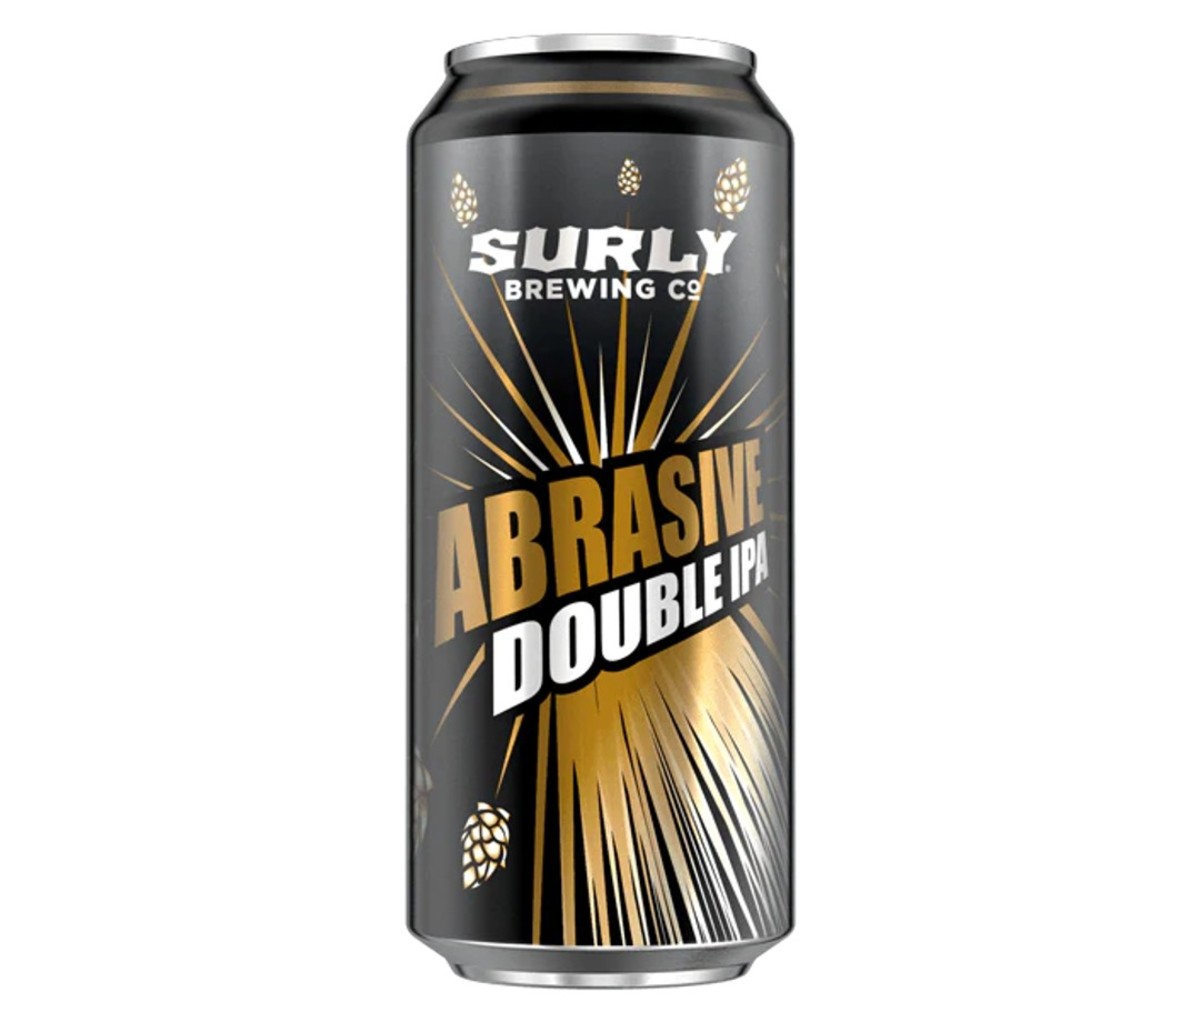 A can of Surly Abrasive Double IPA